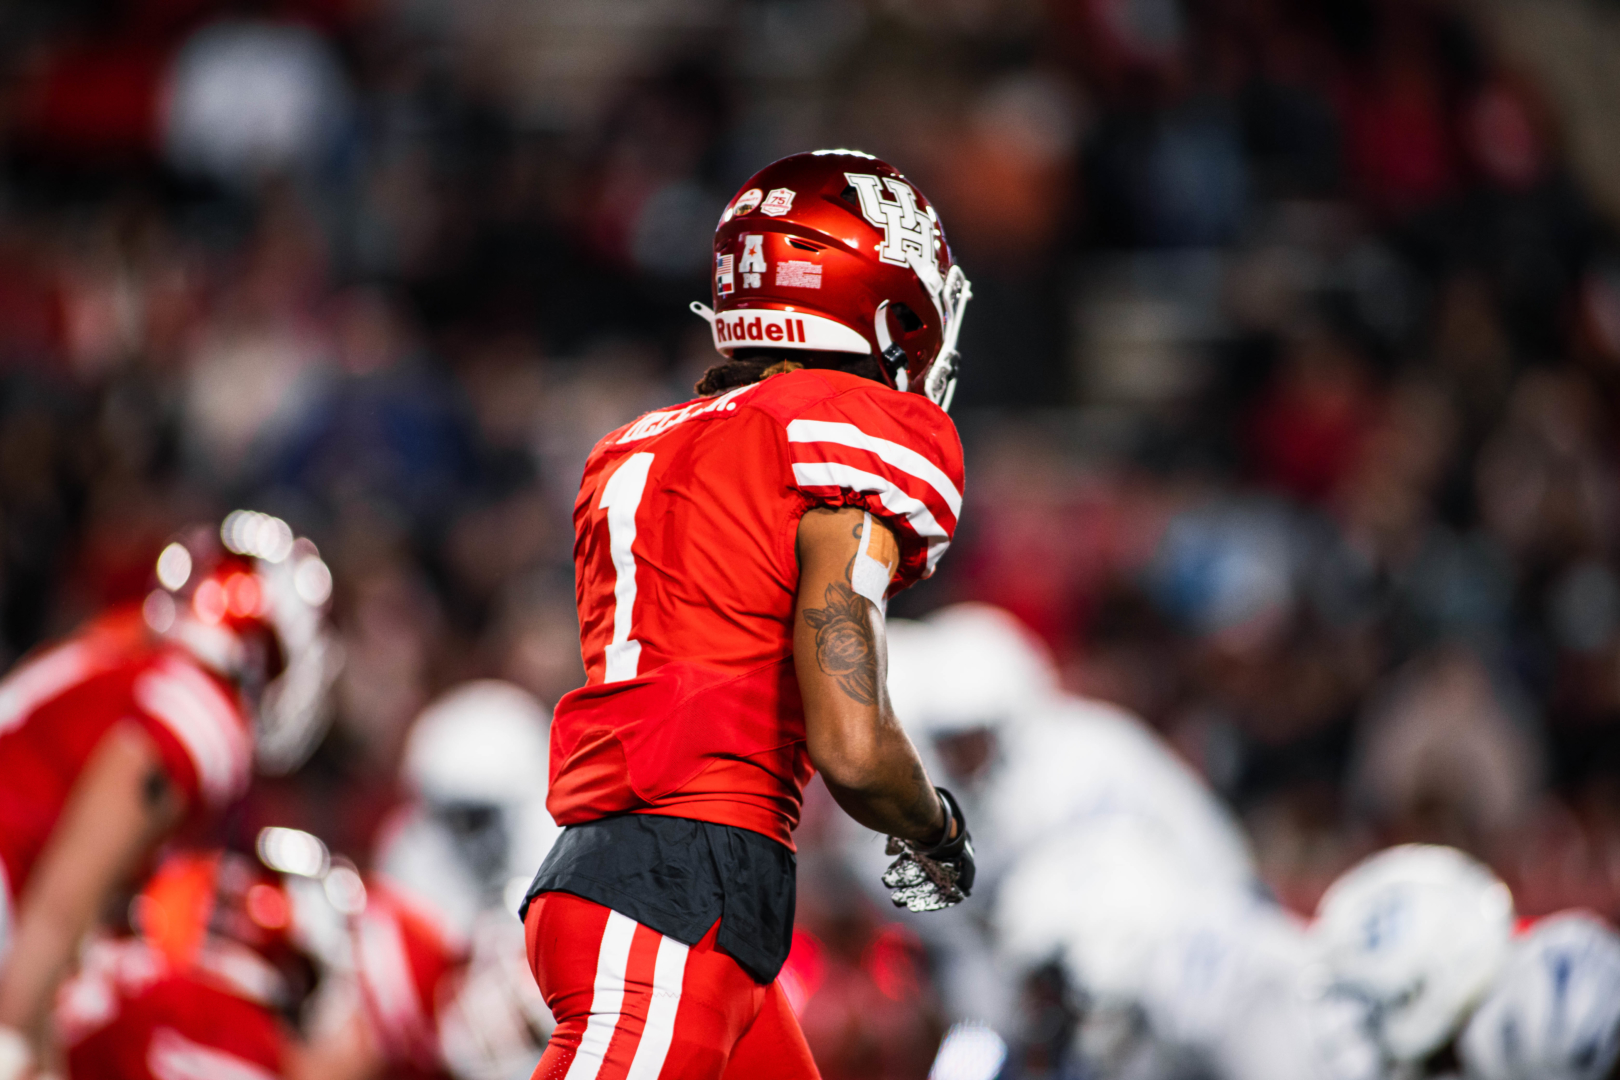 UH receiver Nathaniel Dell leads the Cougars in receptions, receiving yards and touchdowns on the season. | James Schillinger/The Cougar